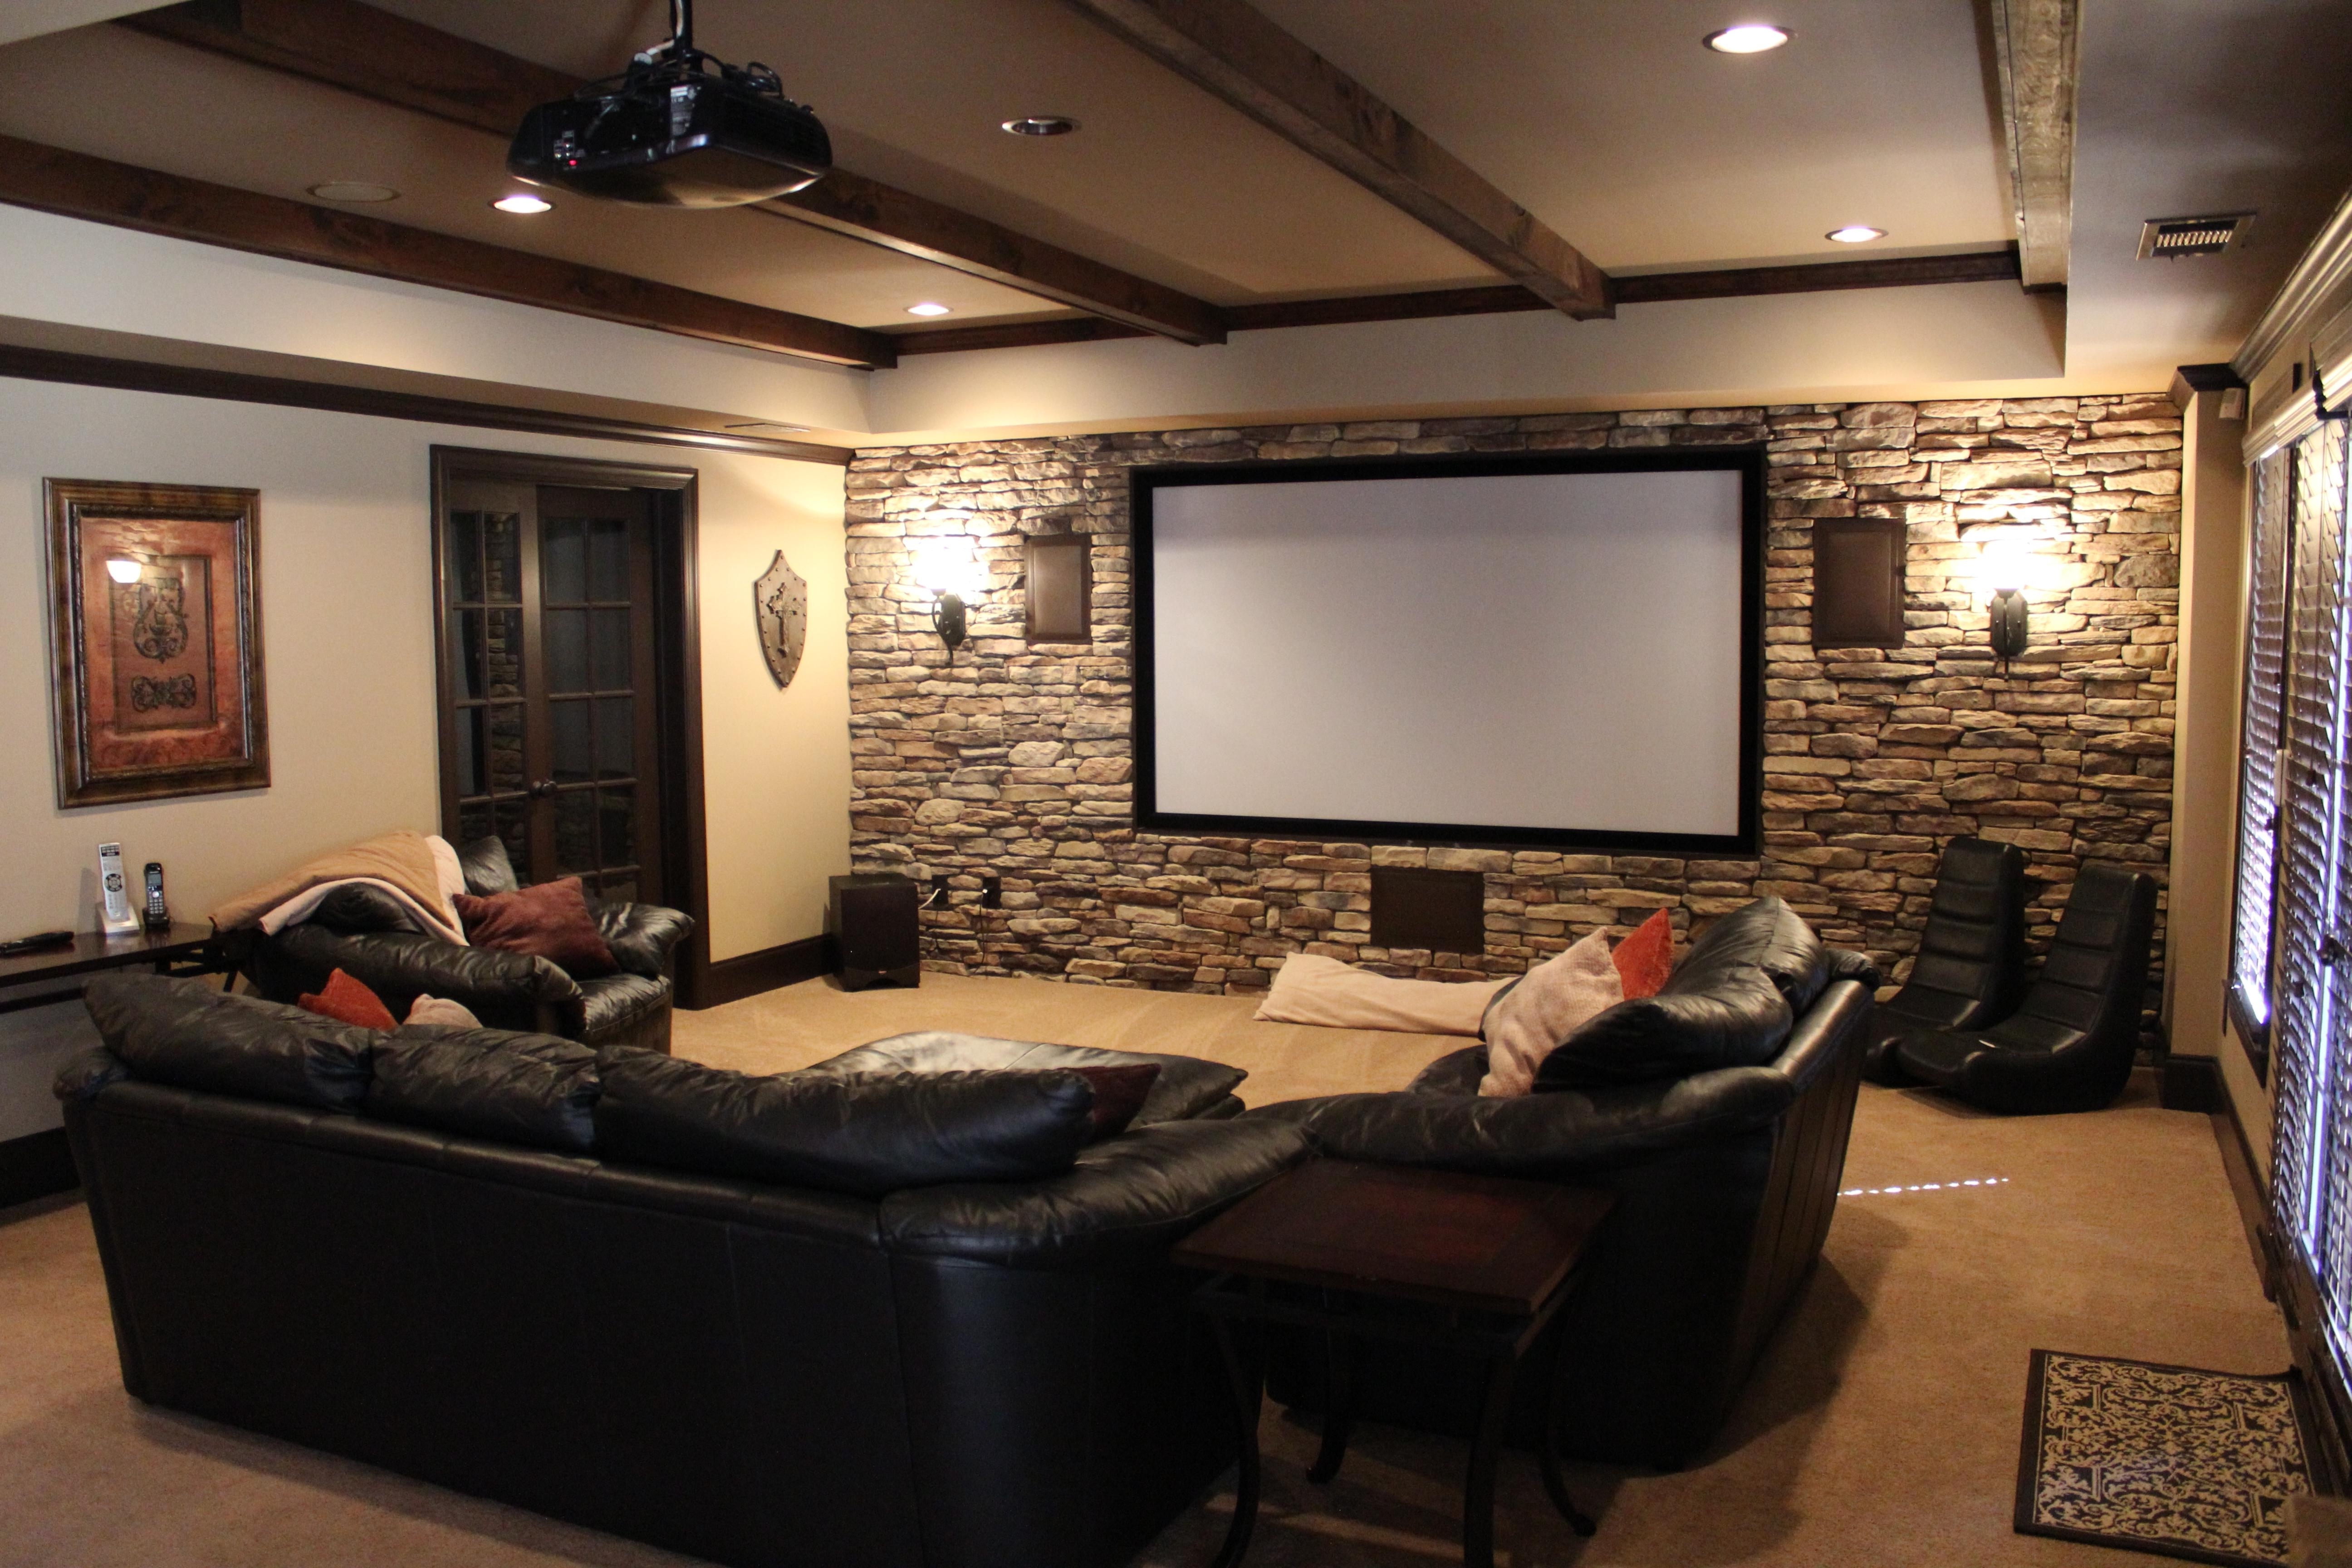 Other Basement Game Room Ideas Fresh On Other Kid Friendly Hgtv 23 Basement Game Room Ideas Magnificent On Other In Home Design Regarding Color Media 13 Basement Game Room Ideas Incredible On